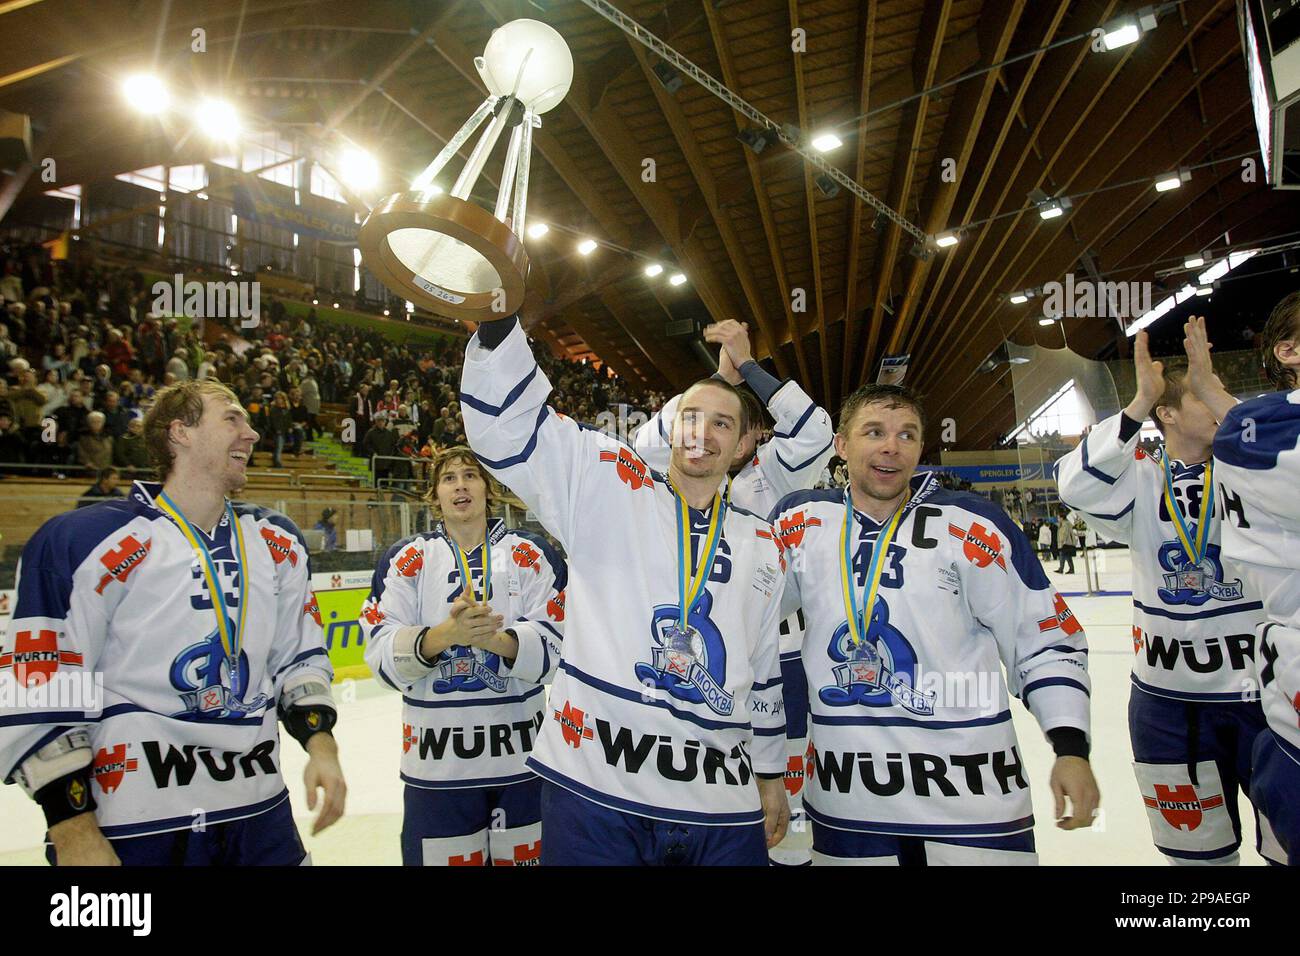 Dynamo Moscows players Peter Cajanek, which scored three time, next to Vitaly Yatchmenev, right, presents the winners trophy of the Spengler Cup after Dynamo Moscow won the final game between Team Canada